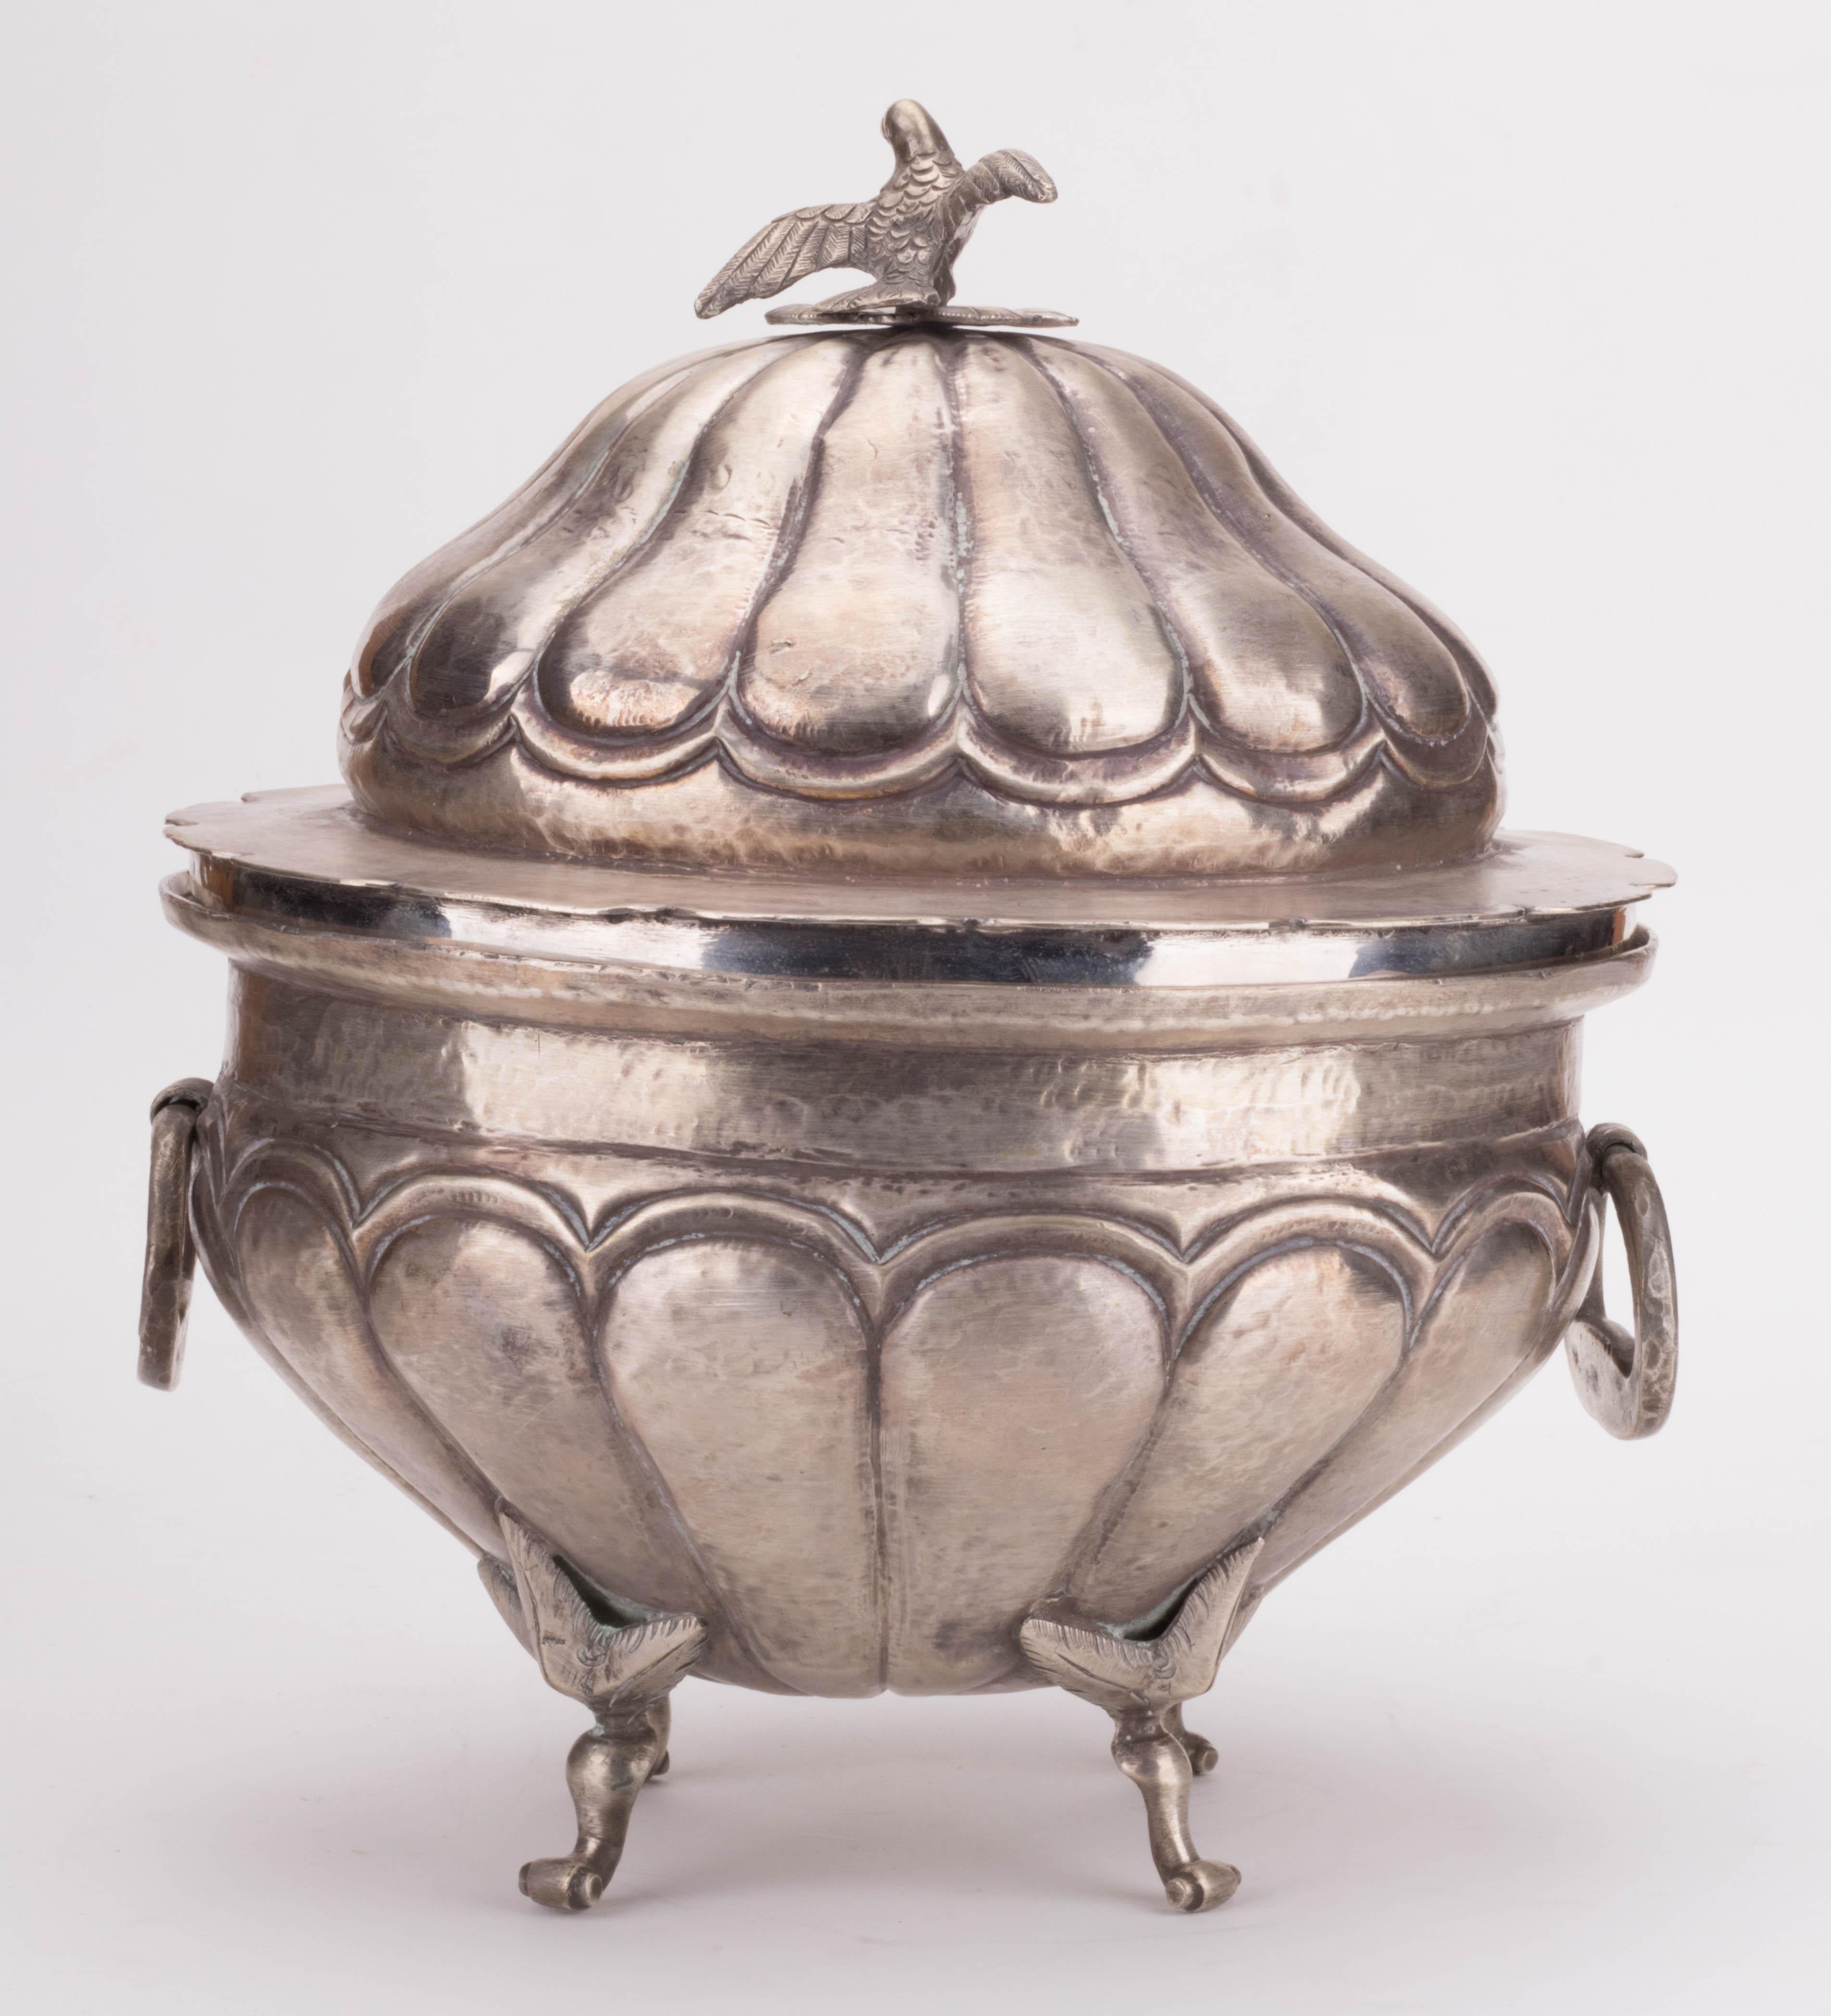 Silver 1780s Colonial Peruvian Tureen with Side Handles and Dove Shaped Knob on Lid